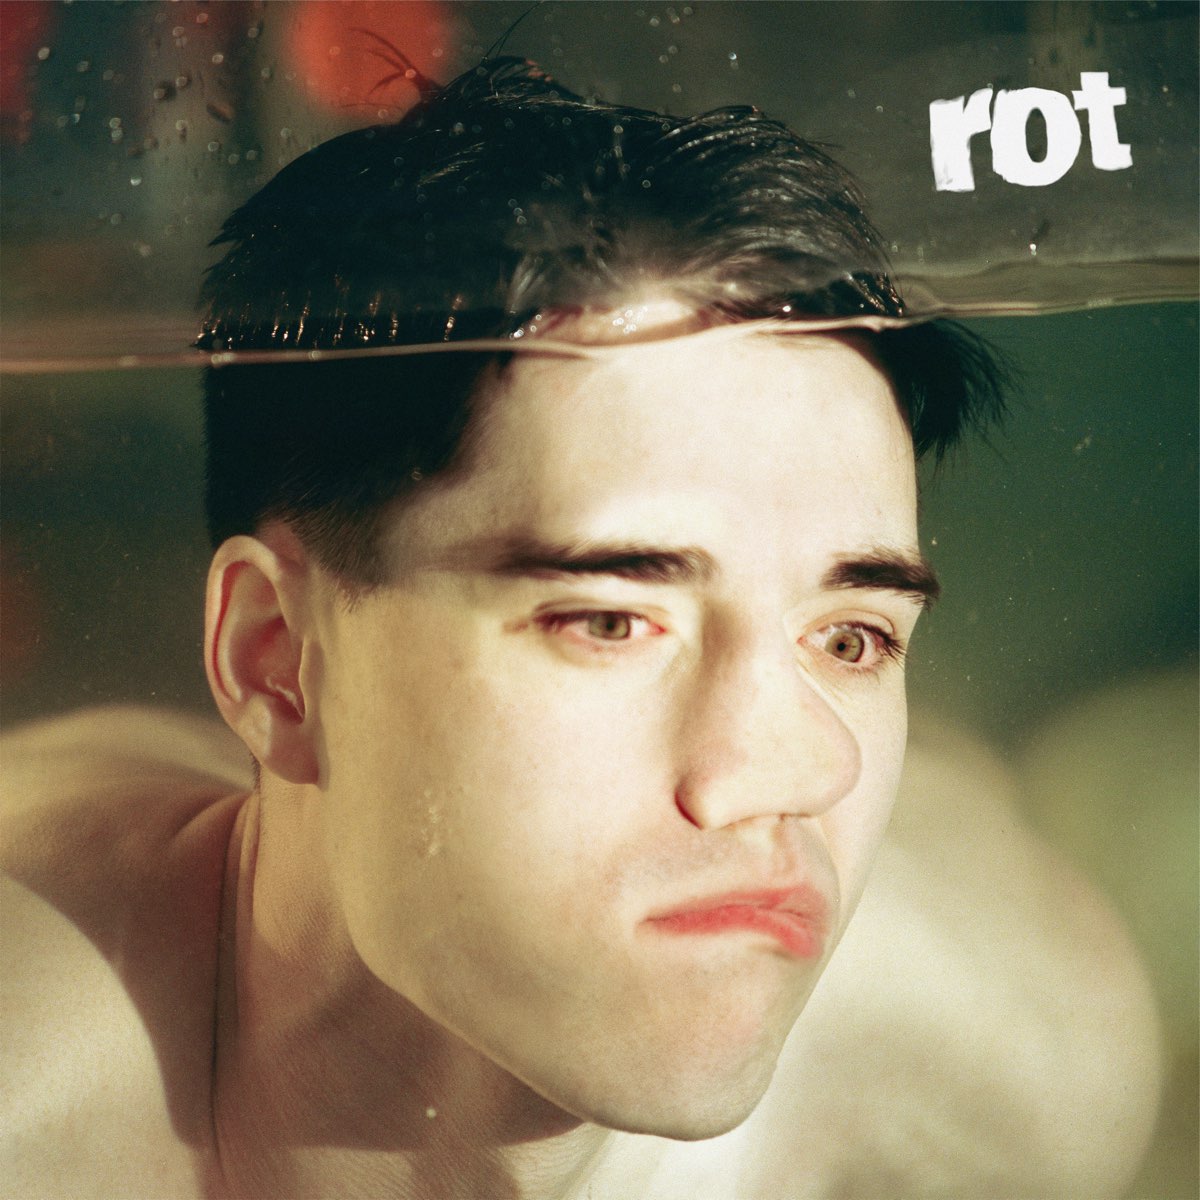 Album cover for "Rot" by Tennyson. Man underwater, the top of his head peaking out. He is pressing his face against the glass, smushing his nose and lip.